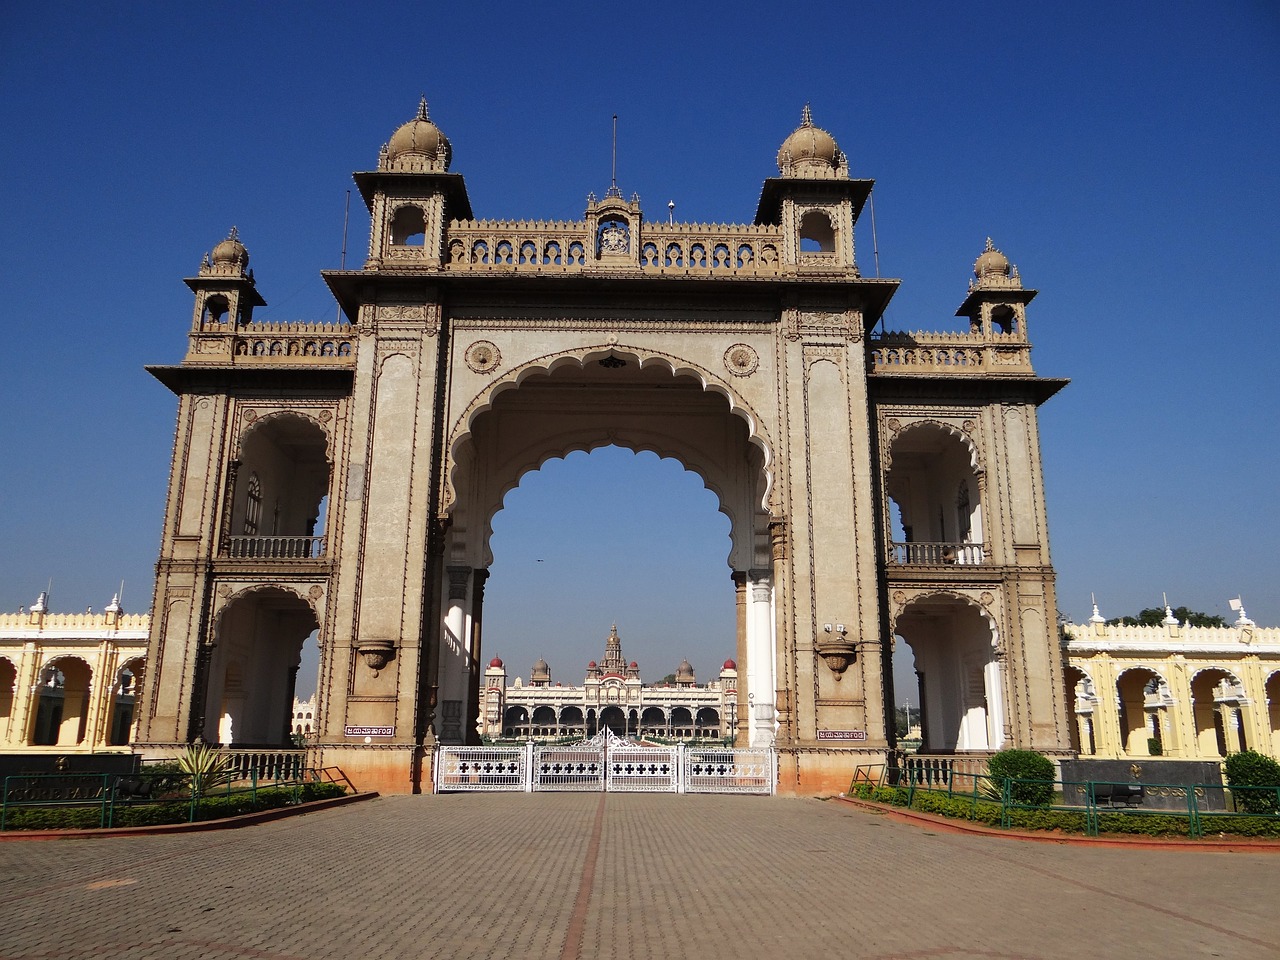 Majestic Mysore: A Day of Palaces, Markets, and Local Delights